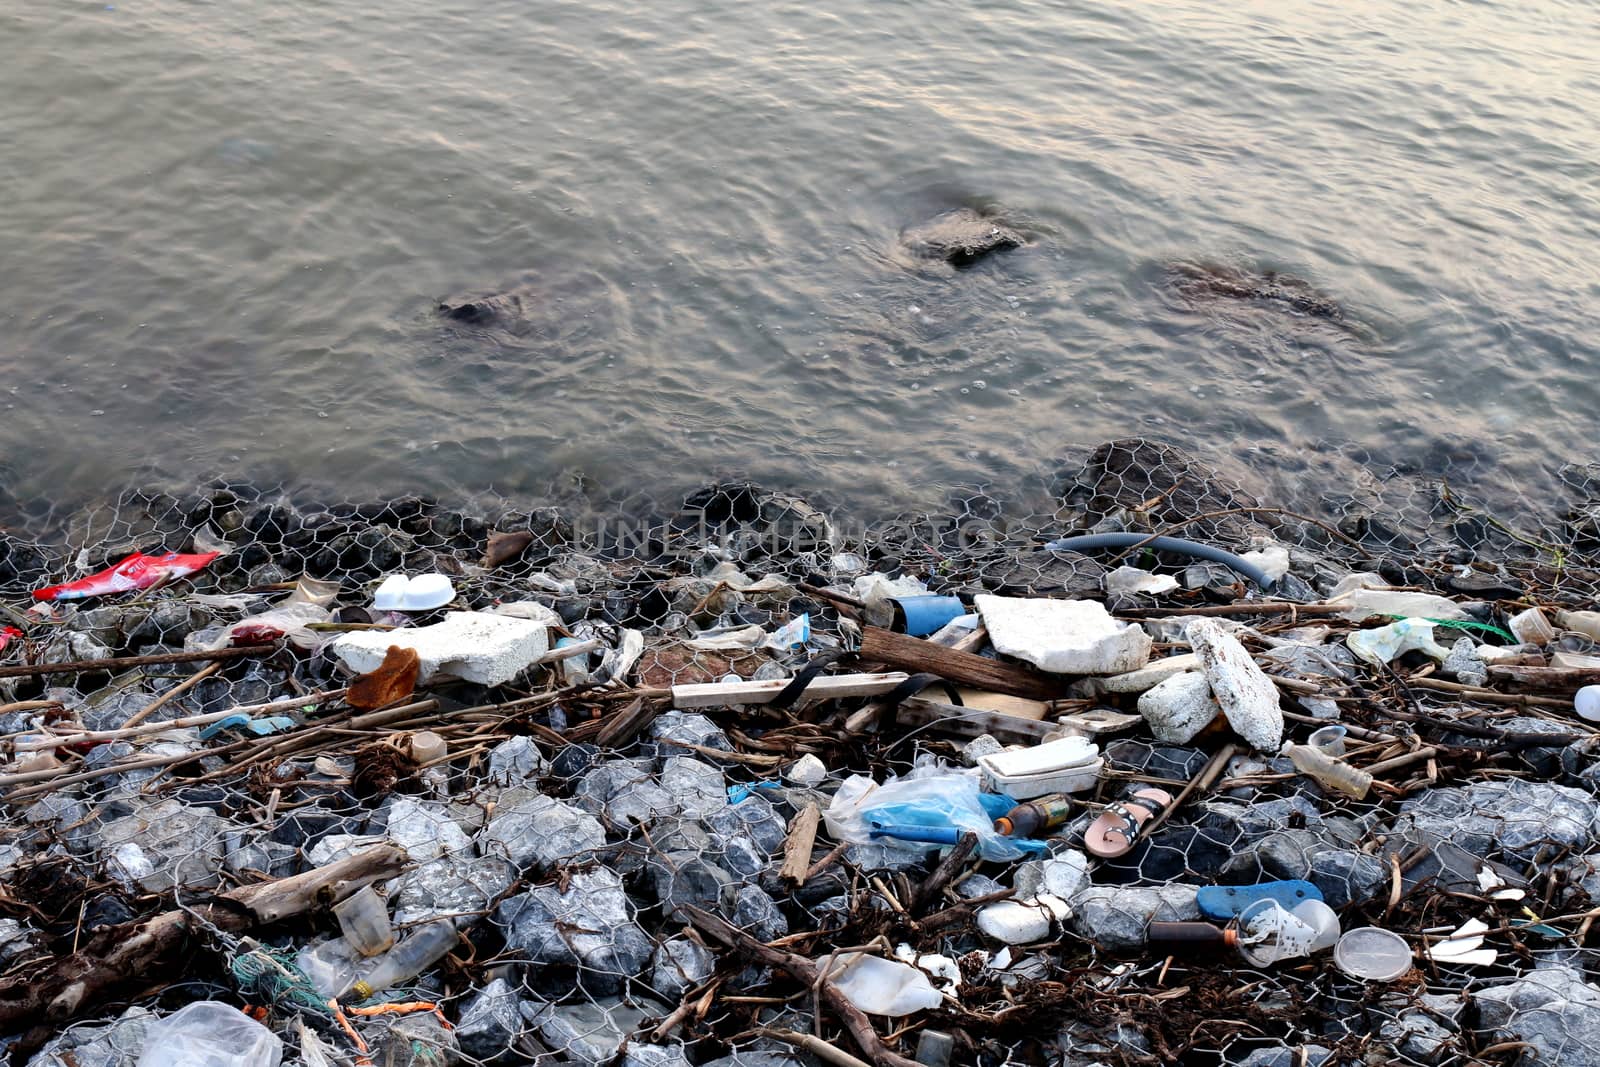 Waste seaside Pollution, Garbage on beach, Waste trash in river, Toxic waste, Wastewater, Dirty water in river